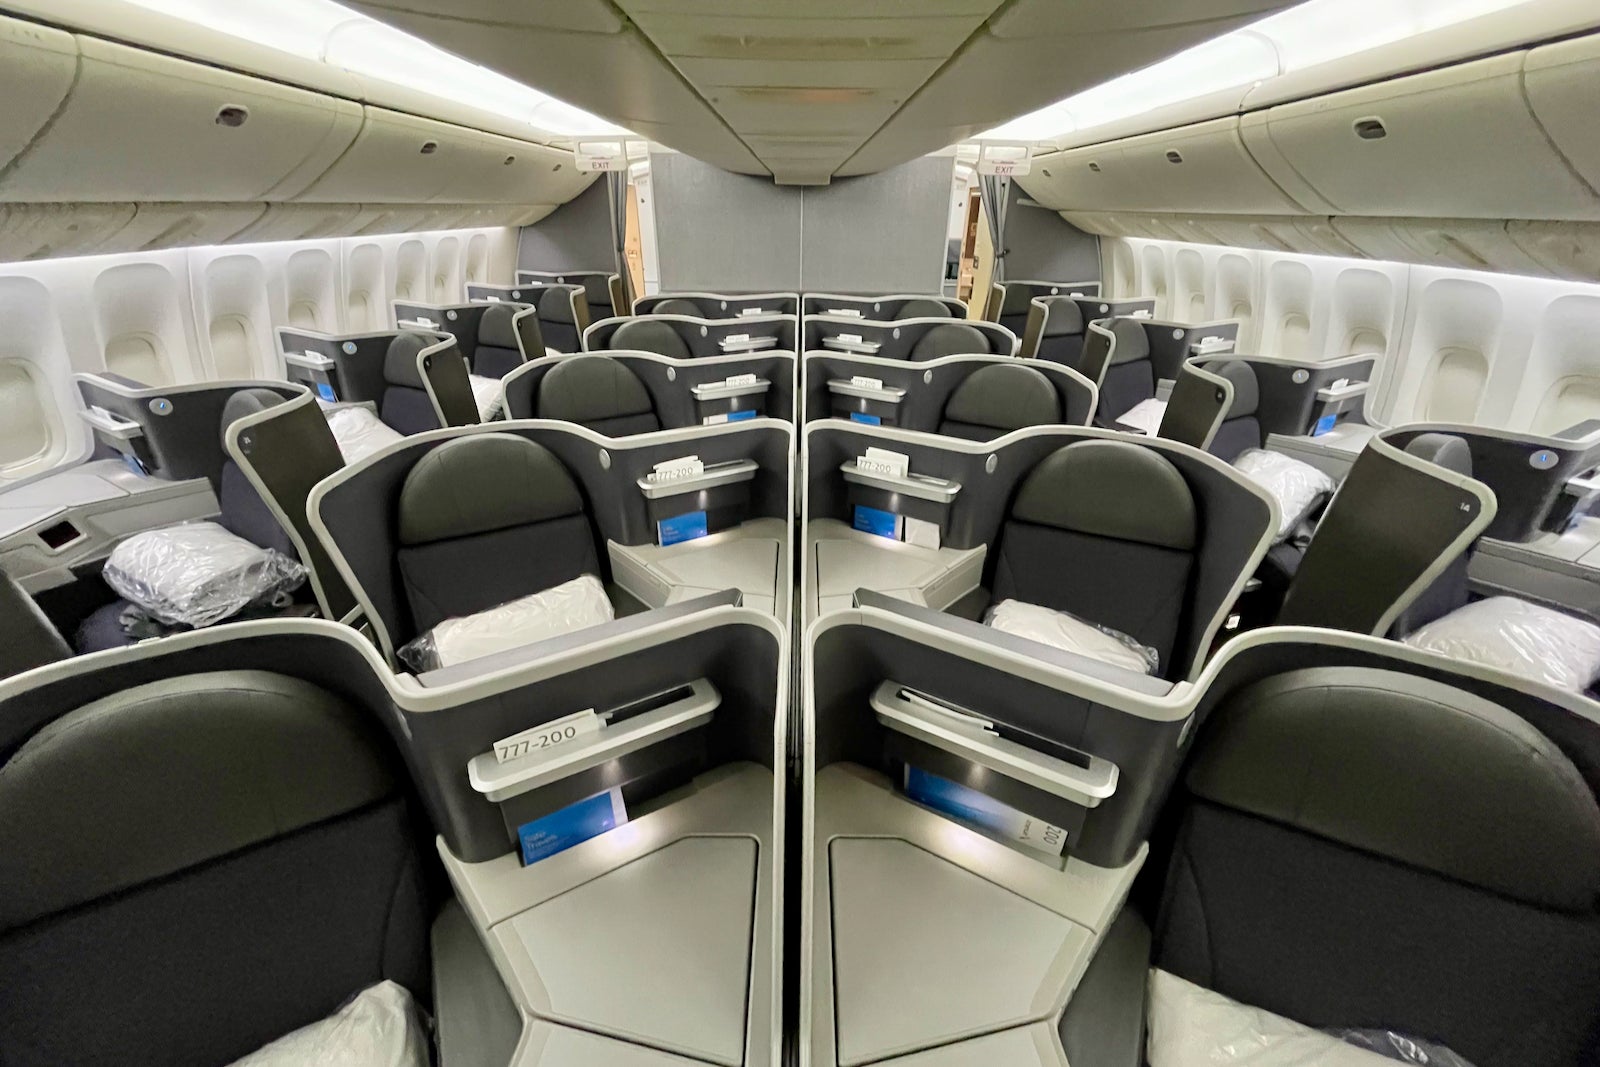 American Airlines Boeing 777-200 Business Class